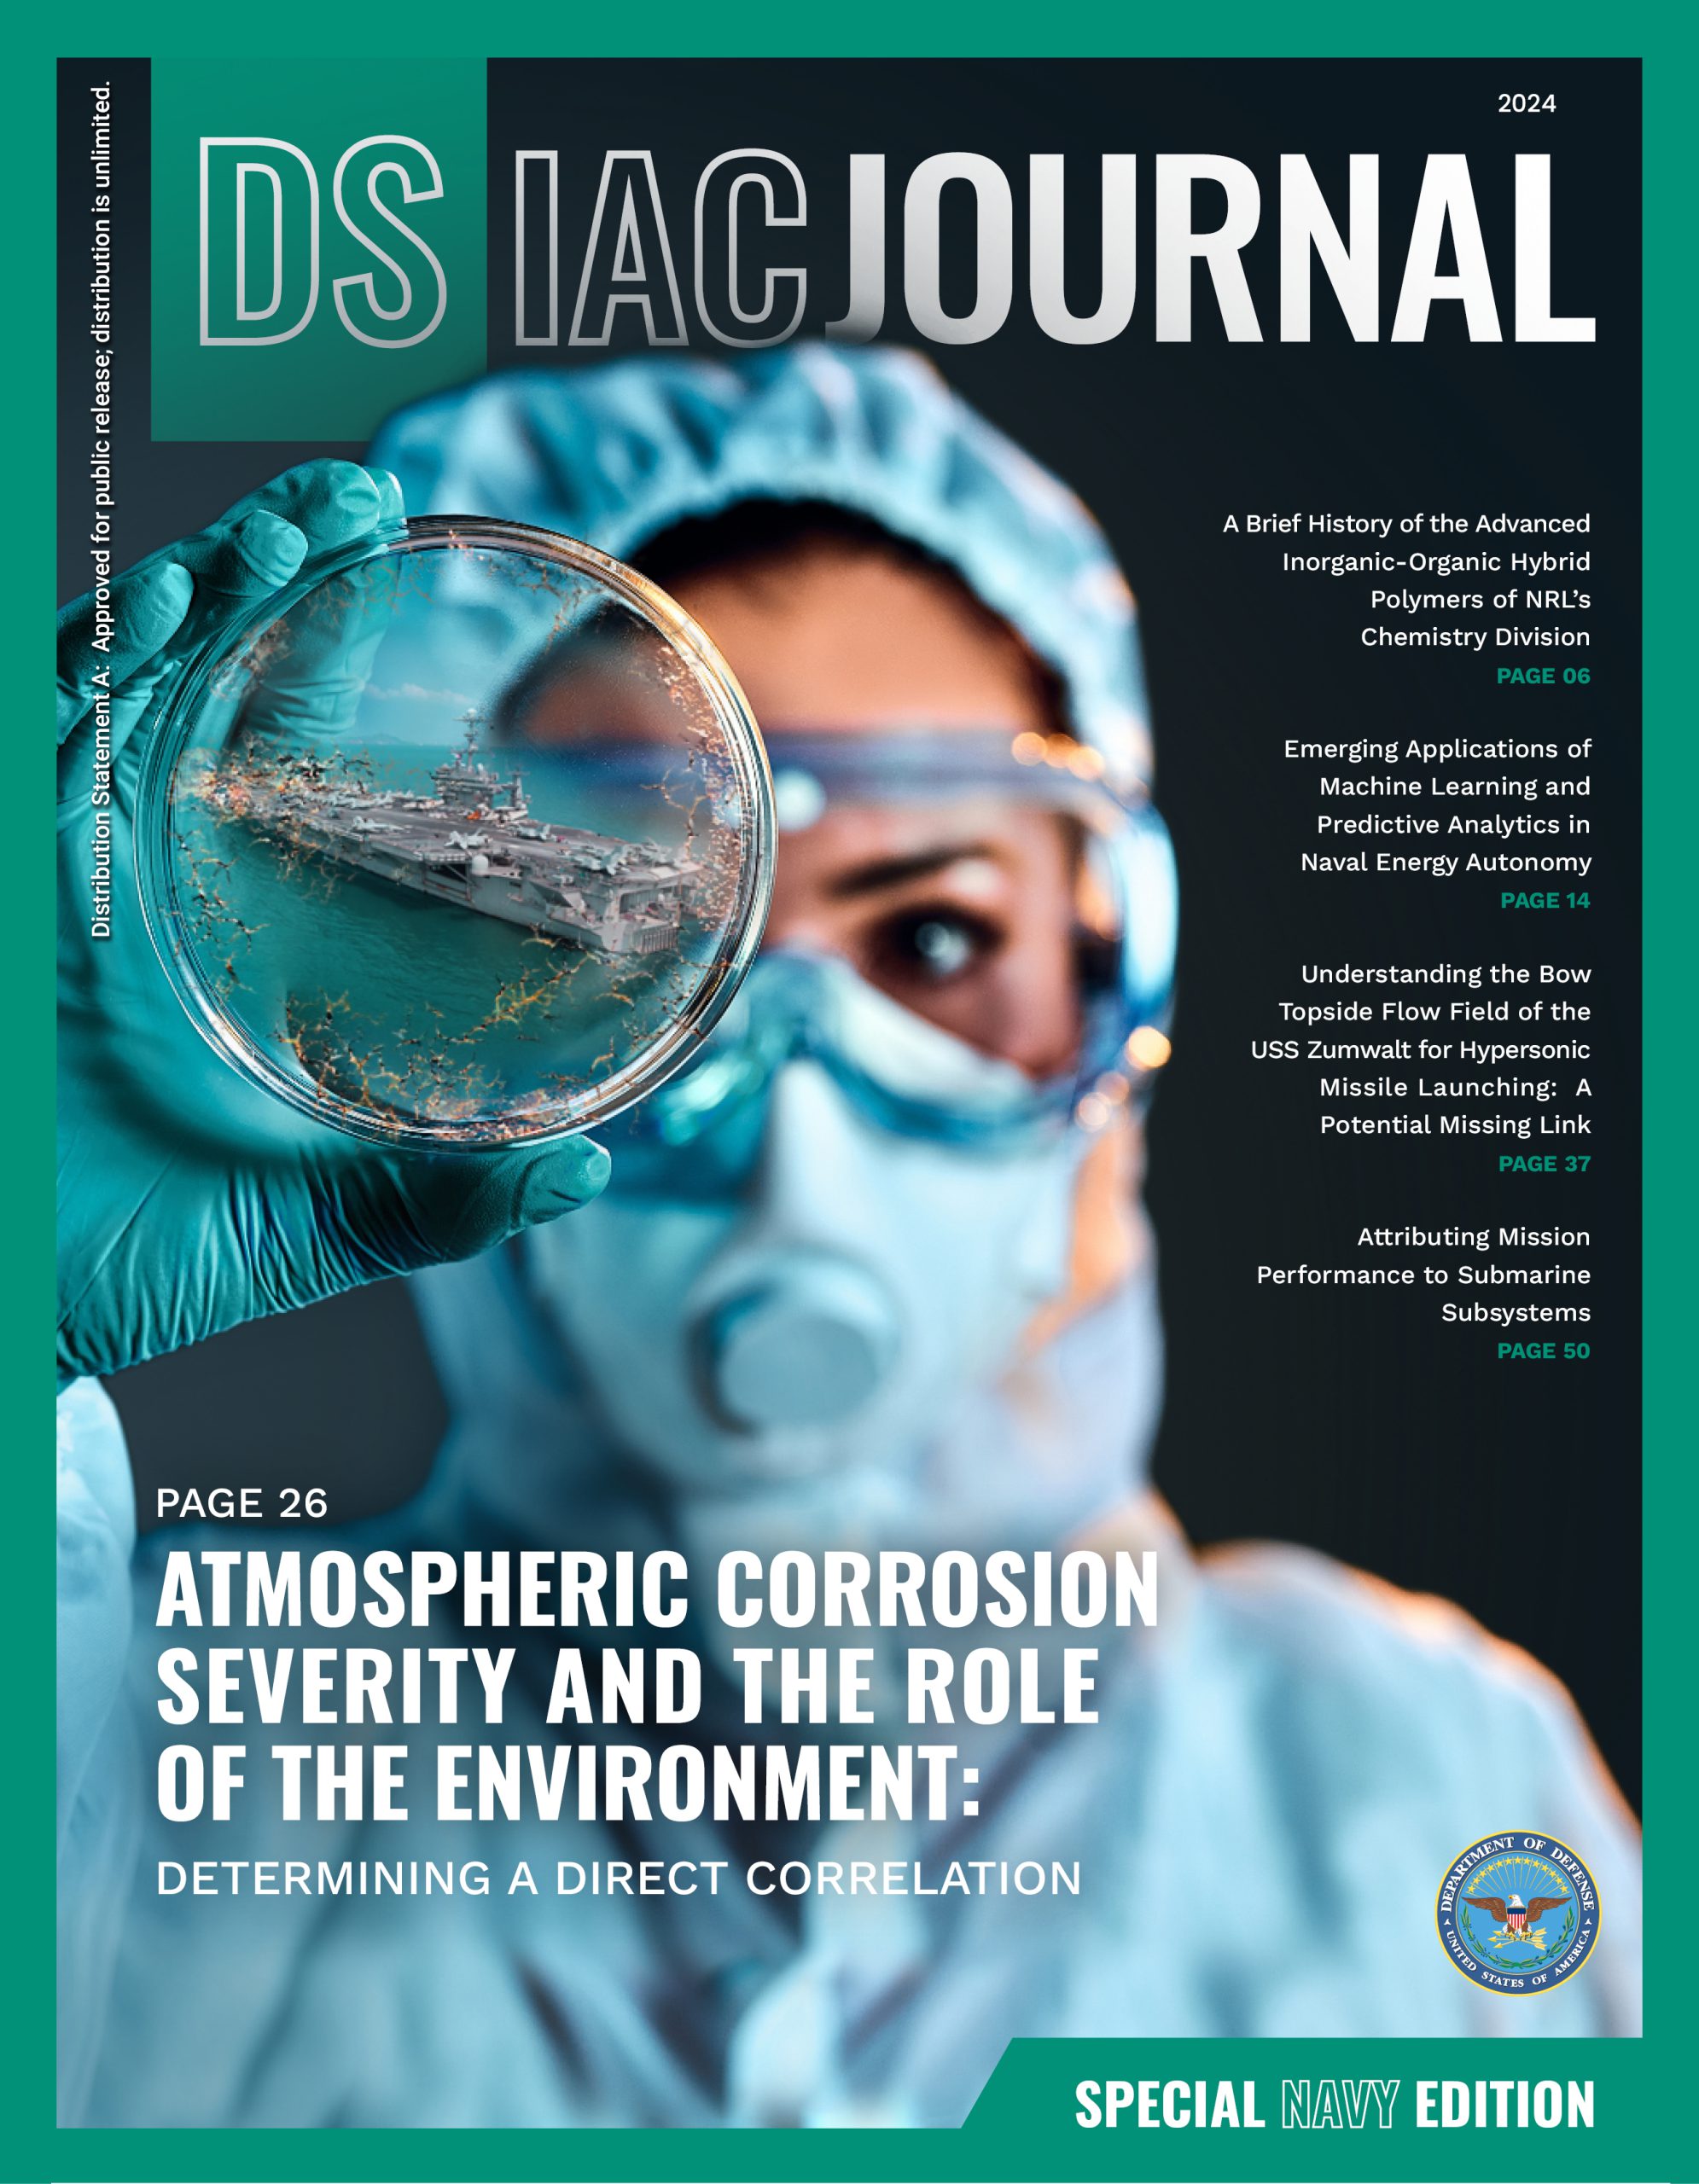 journal cover showing a person in PPE holding a petri dish with an image of a ship on it